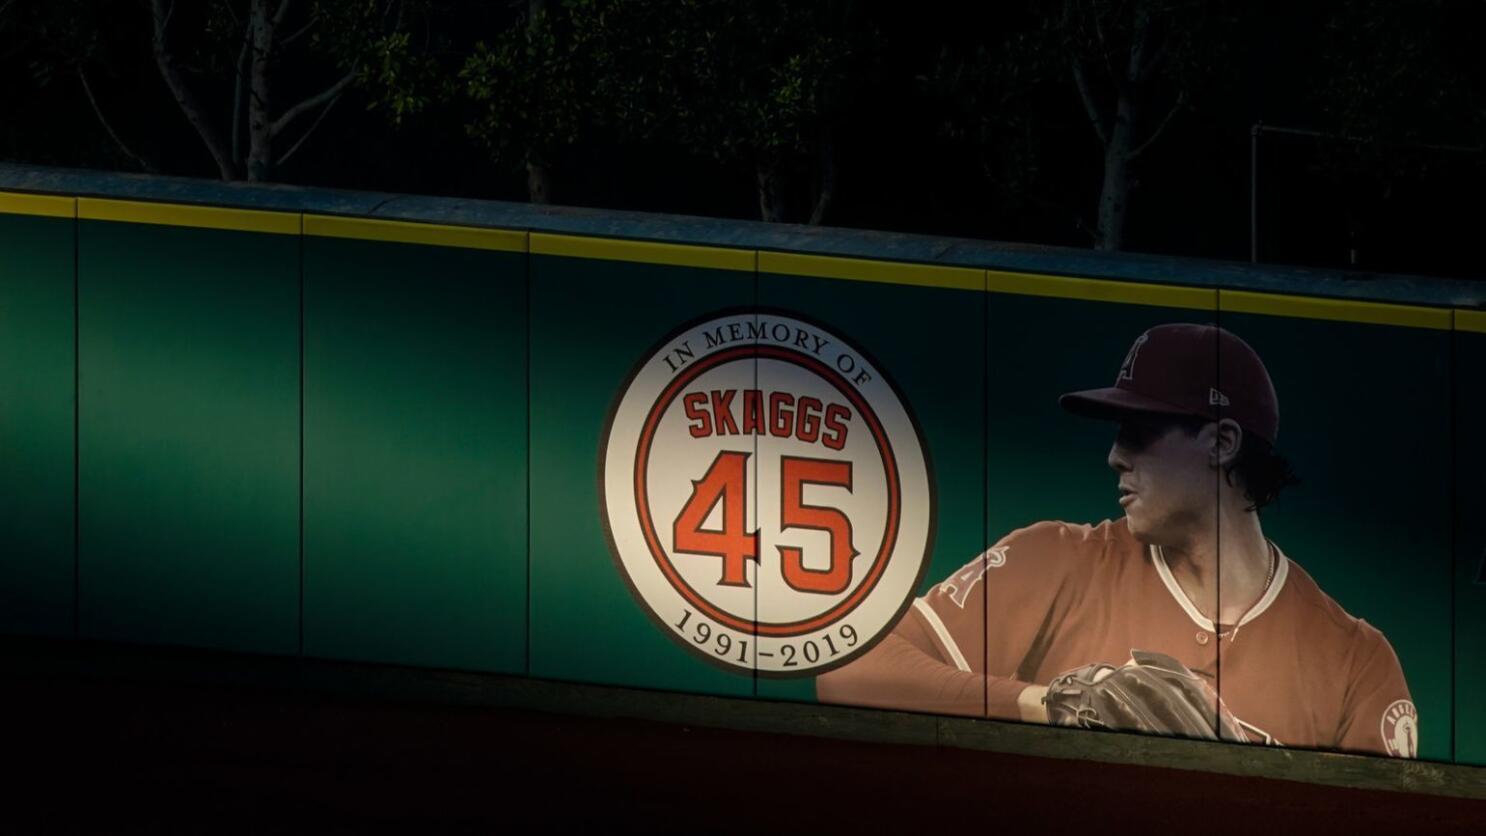 Tyler Skaggs tribute: Angels all wear No. 45 to honor late pitcher